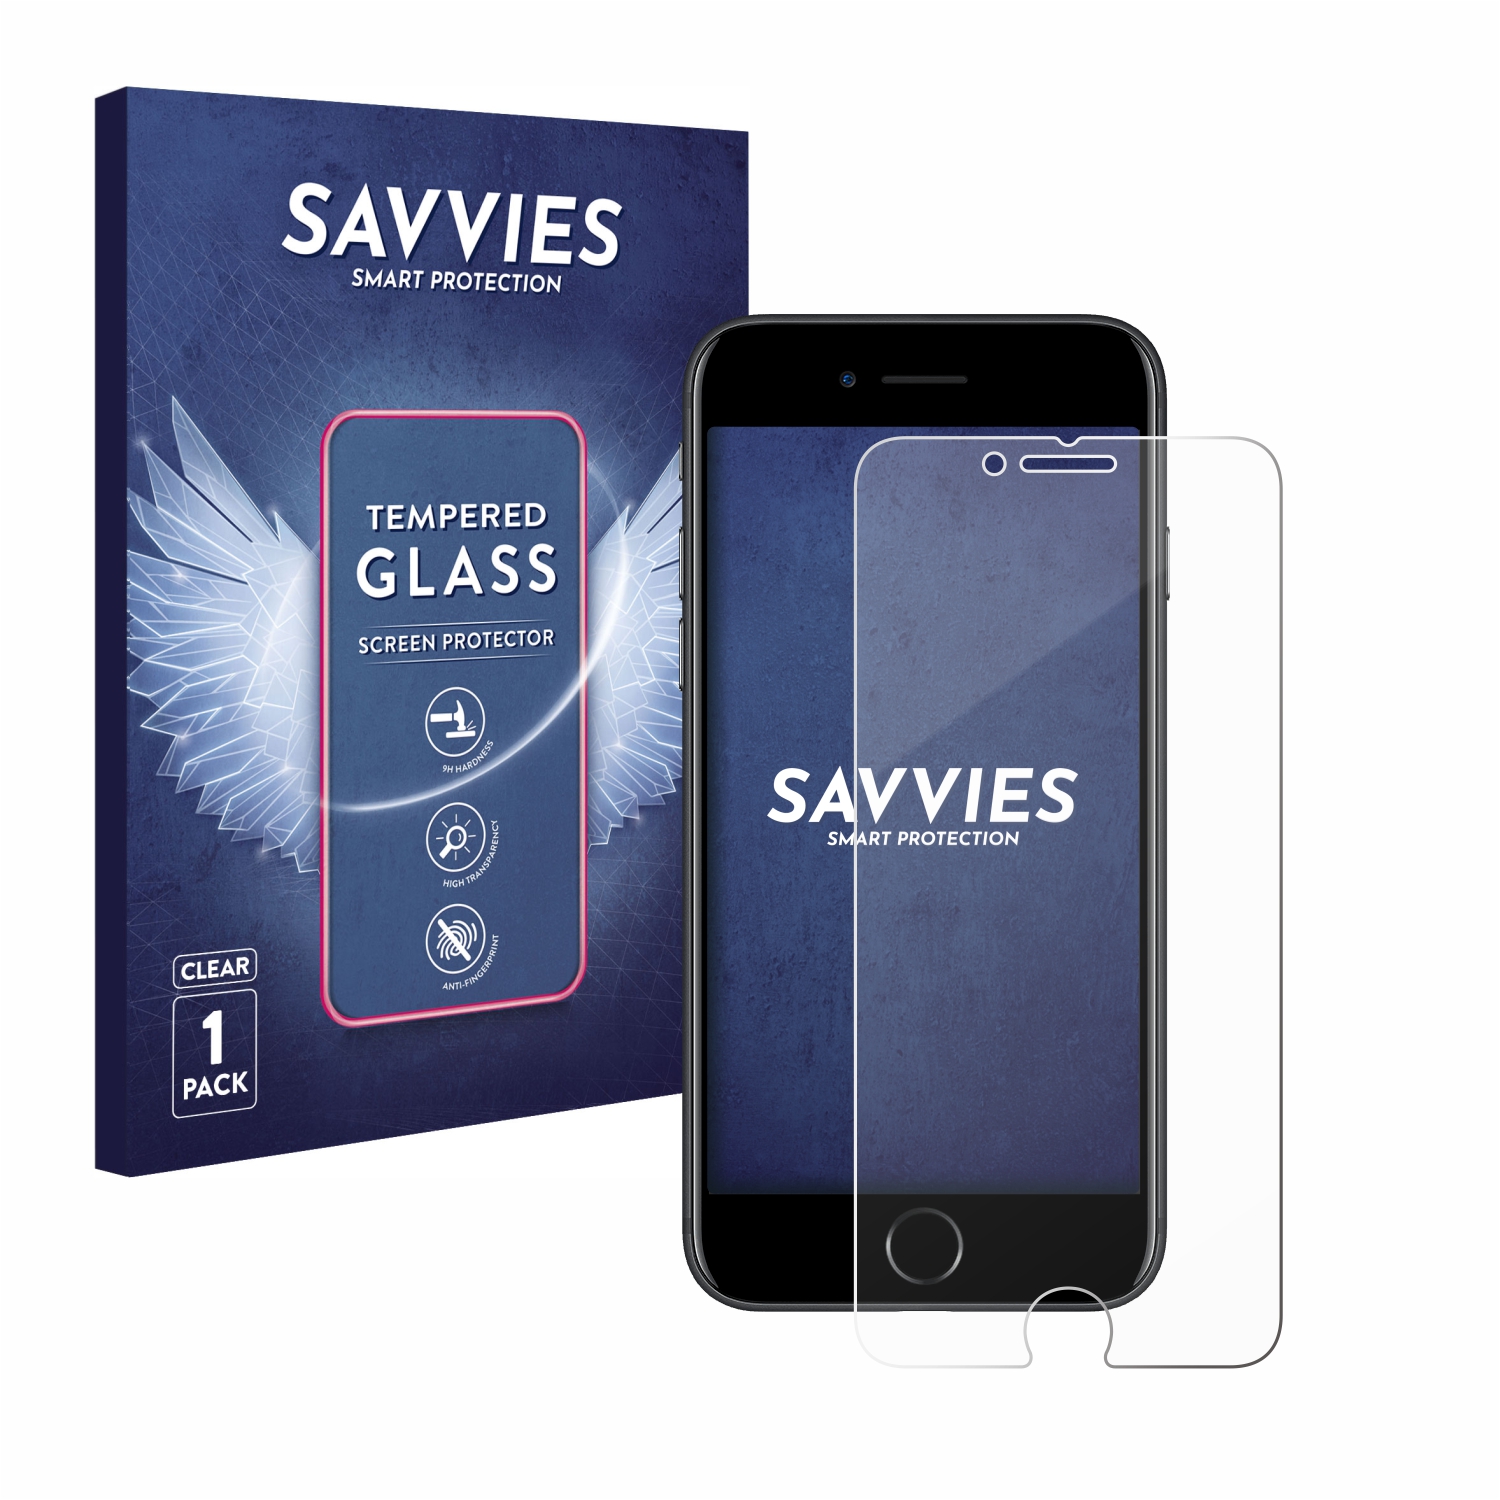 Savvies Crystalclear Screen Protector for Sifteo cubes Display Protection Film Protective Film 100% fits 